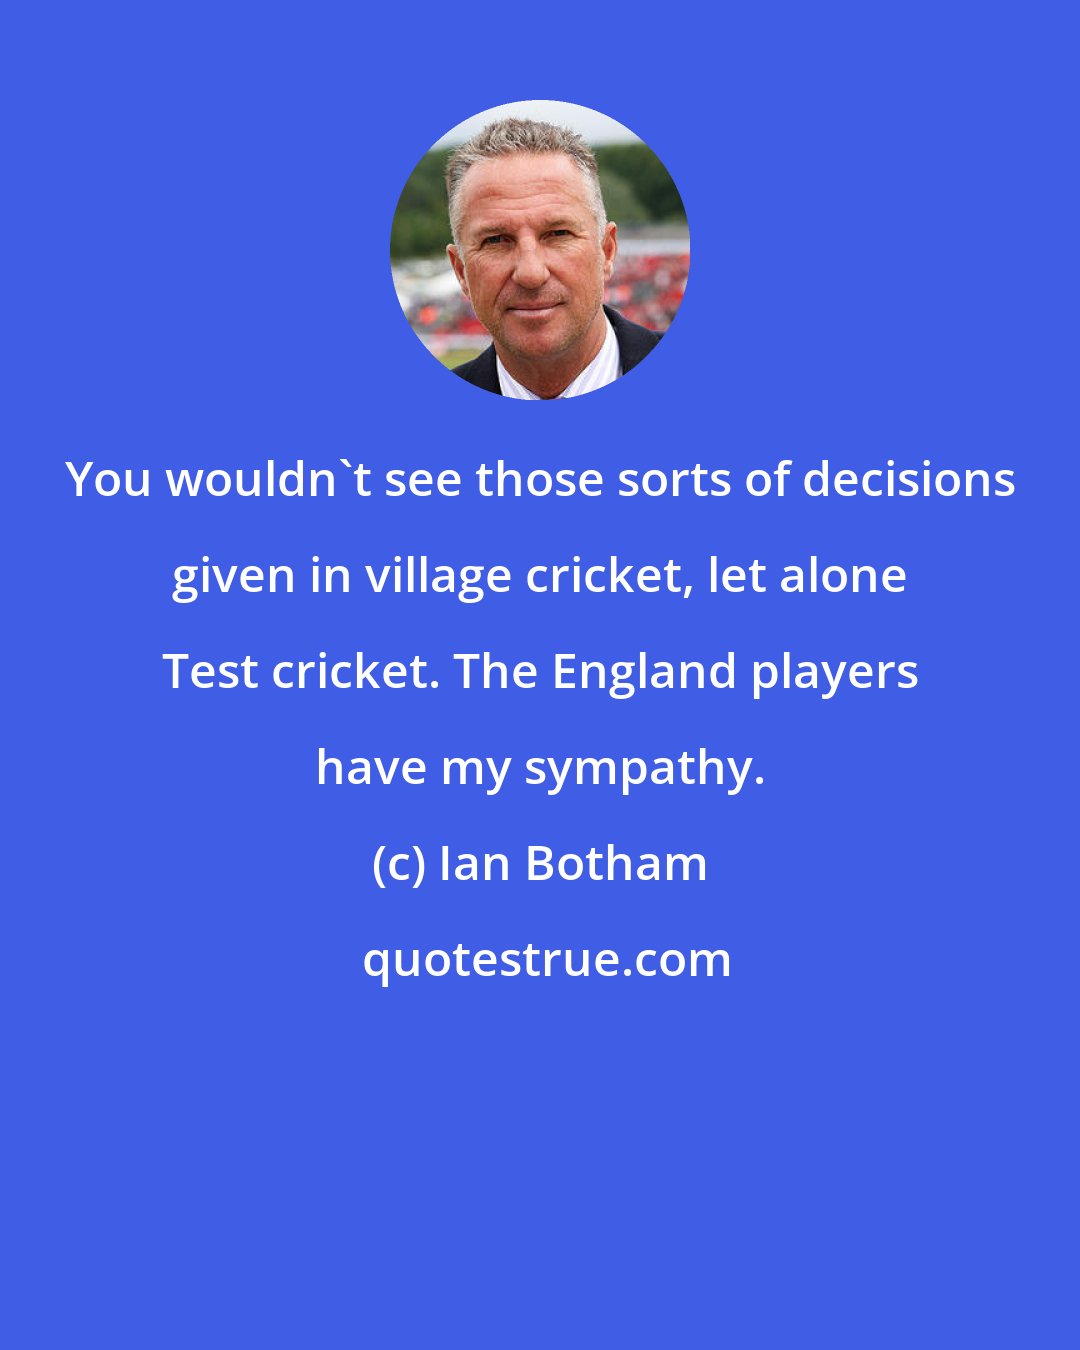 Ian Botham: You wouldn't see those sorts of decisions given in village cricket, let alone Test cricket. The England players have my sympathy.